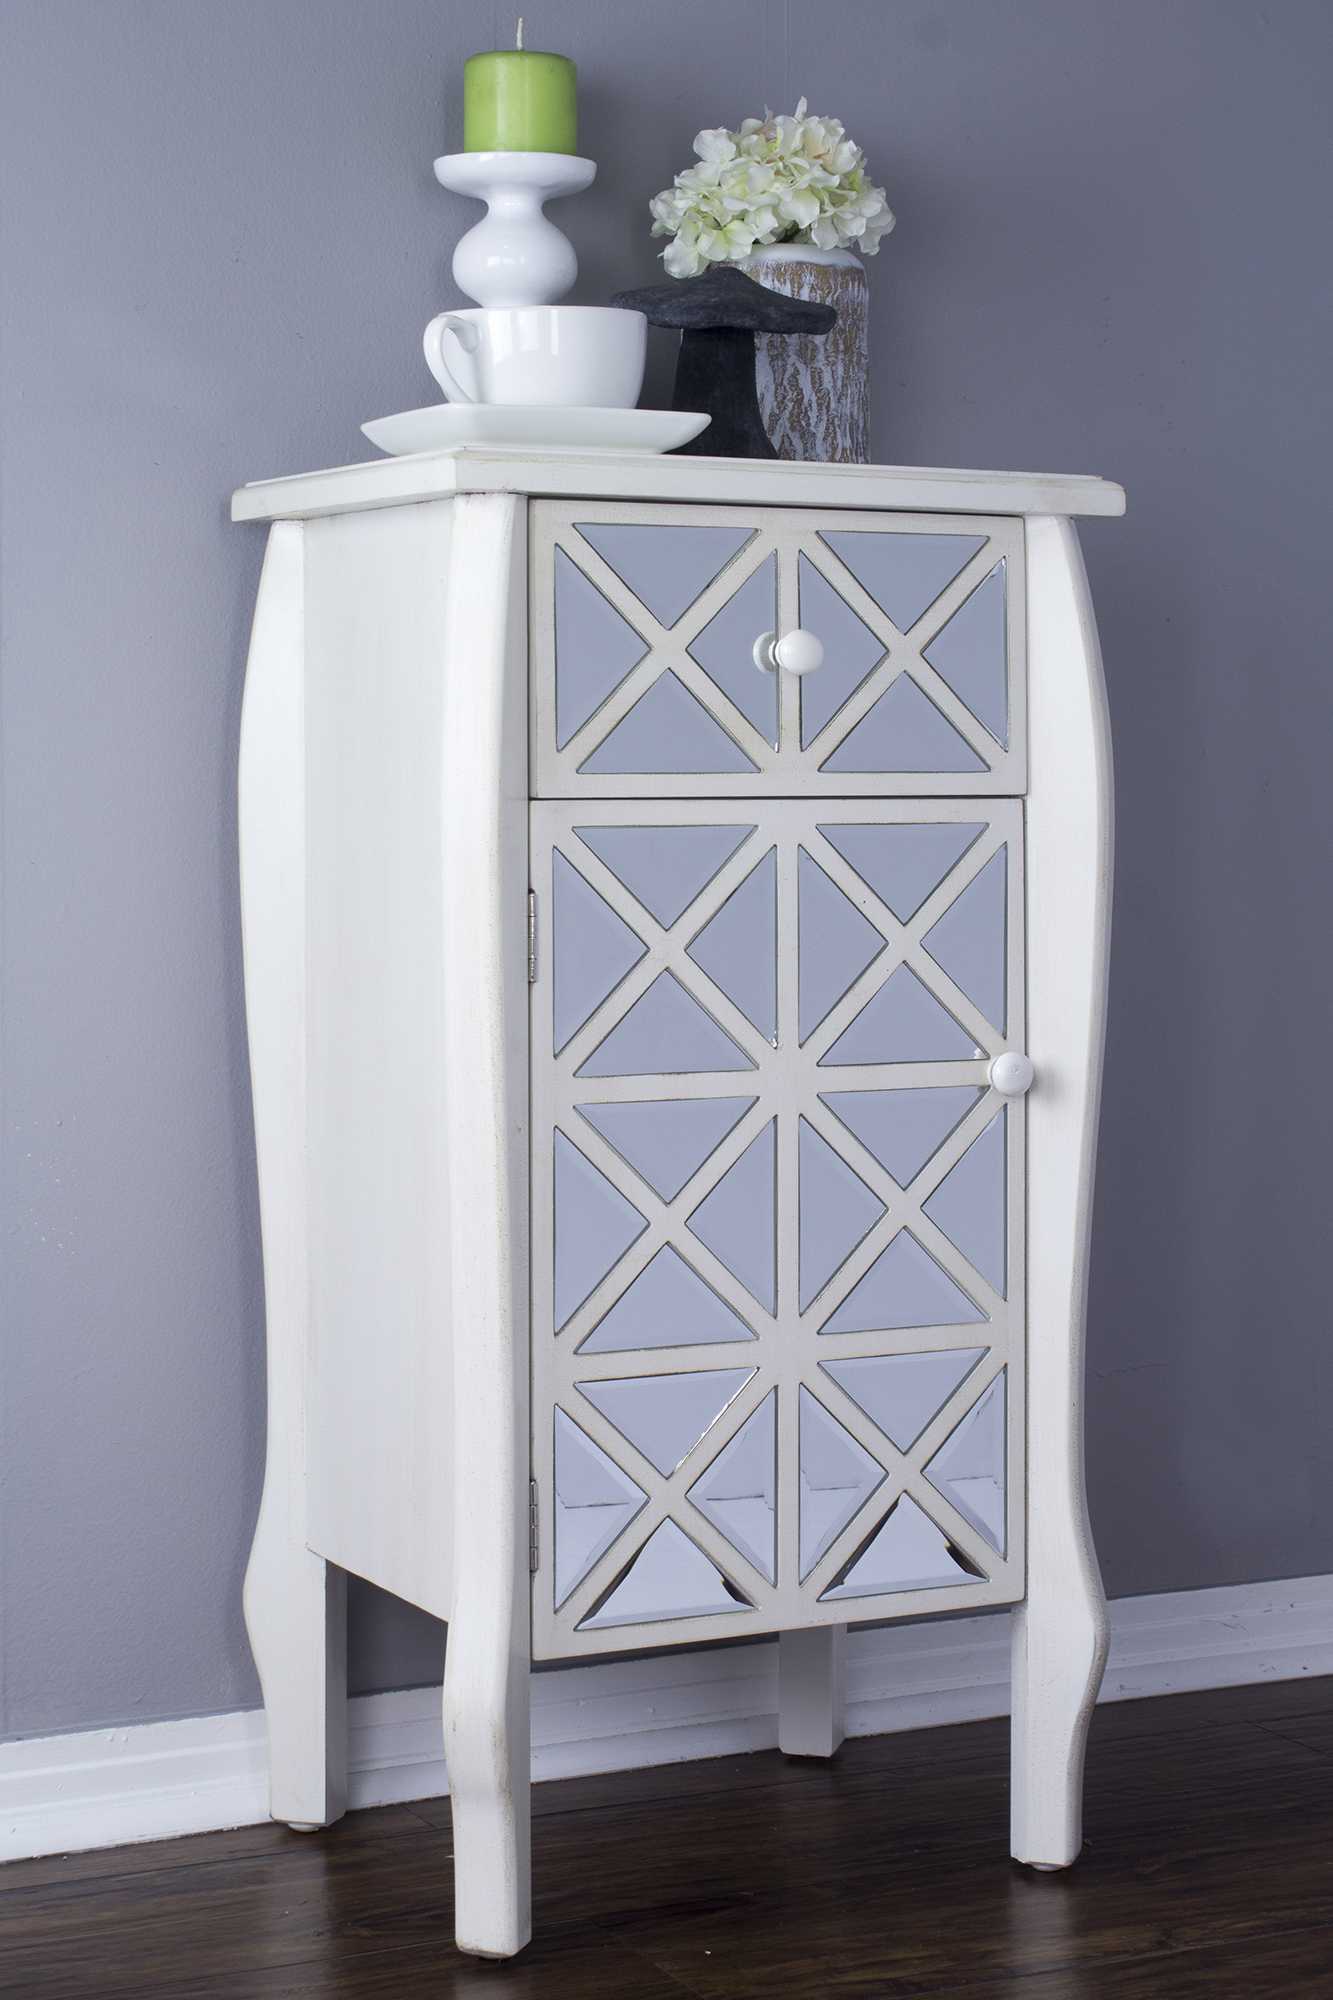 24.75" X 19" X 39.75" Antique White MDF Wood Mirrored Glass Accent Cabinet with Mirrored Drawer and Door